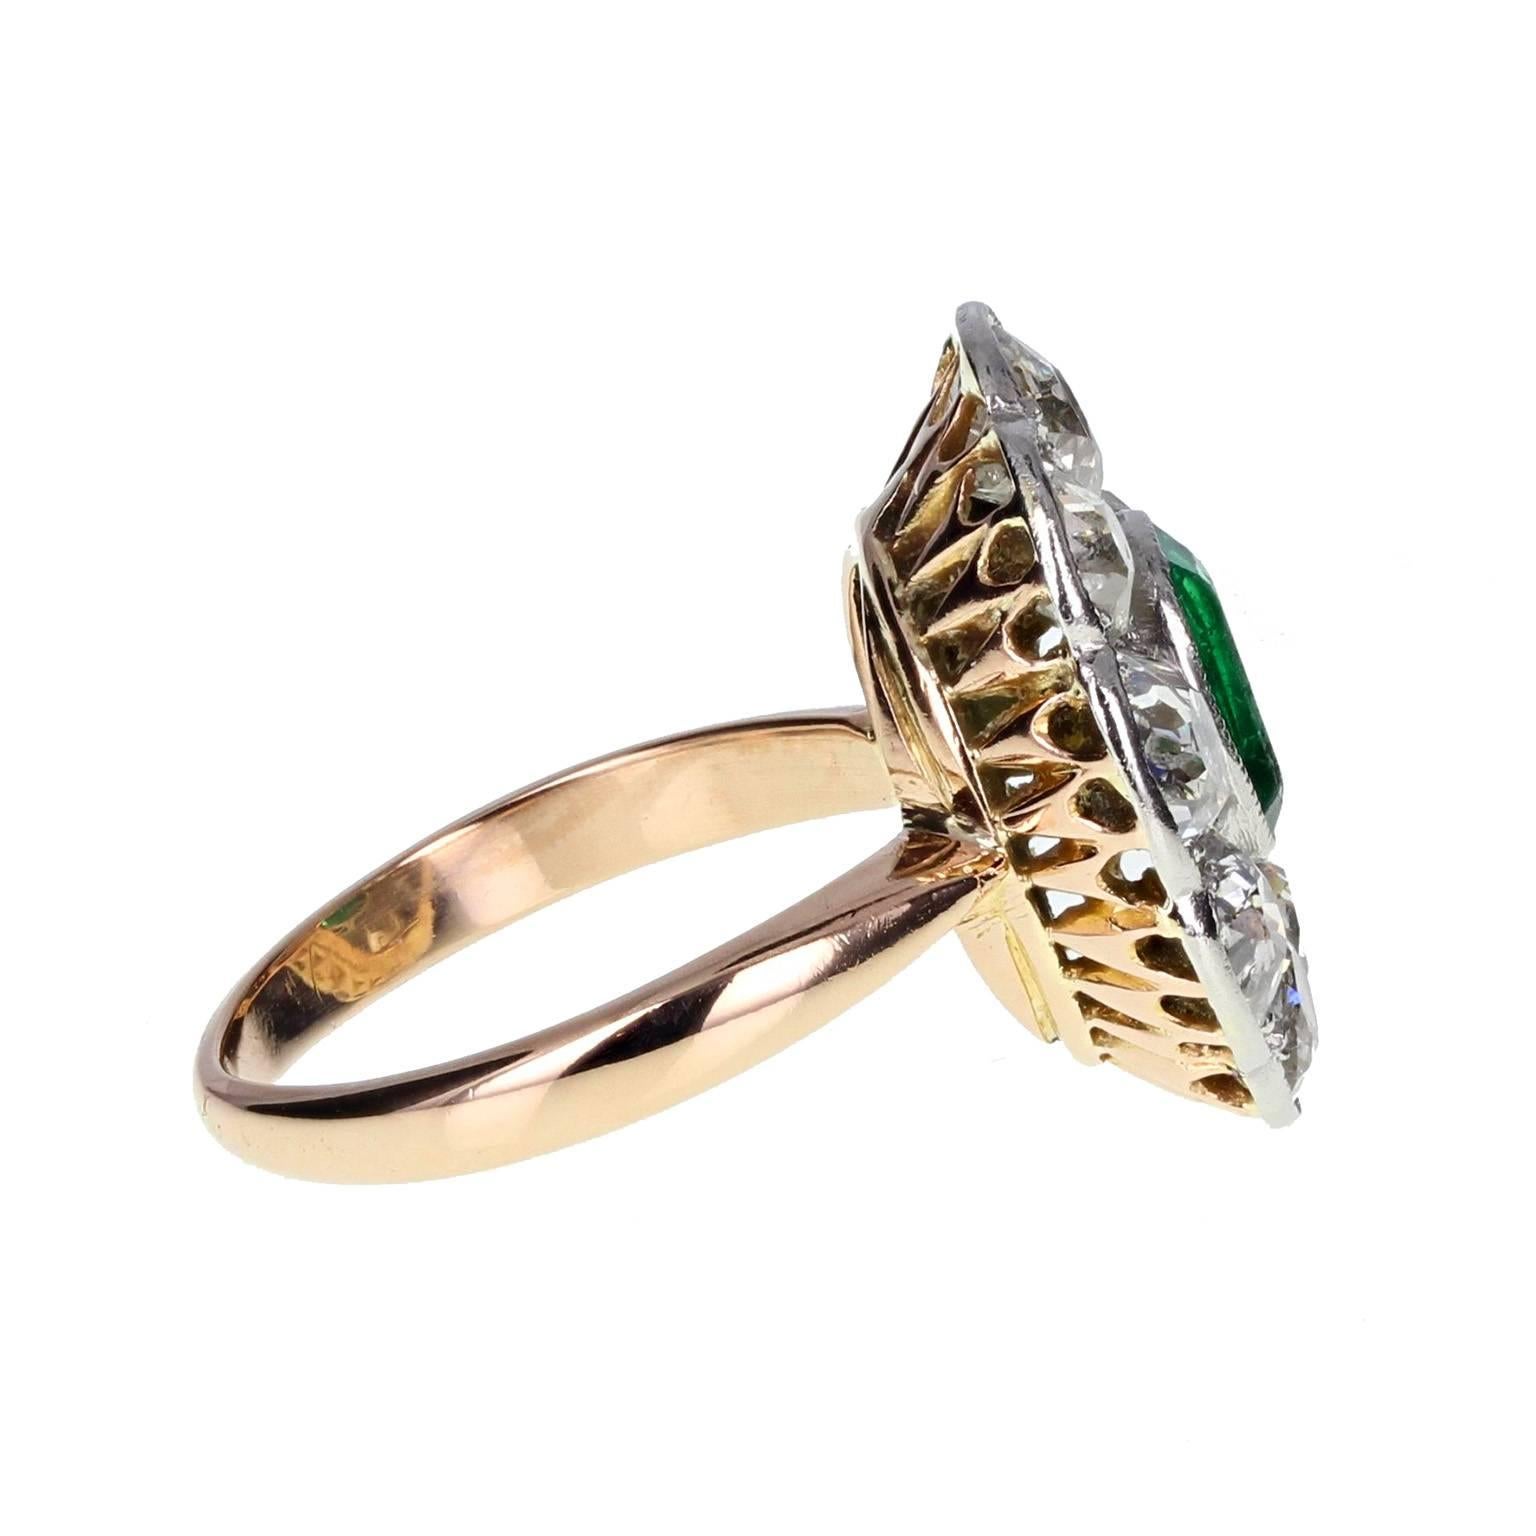 This wonderful Edwardian cluster ring features a central oval-cut lush green emerald, mounted in a mille-grain setting with pierced work, surrounded generously by old-cut diamonds. Rose gold shank and under setting. French assay marks to outer